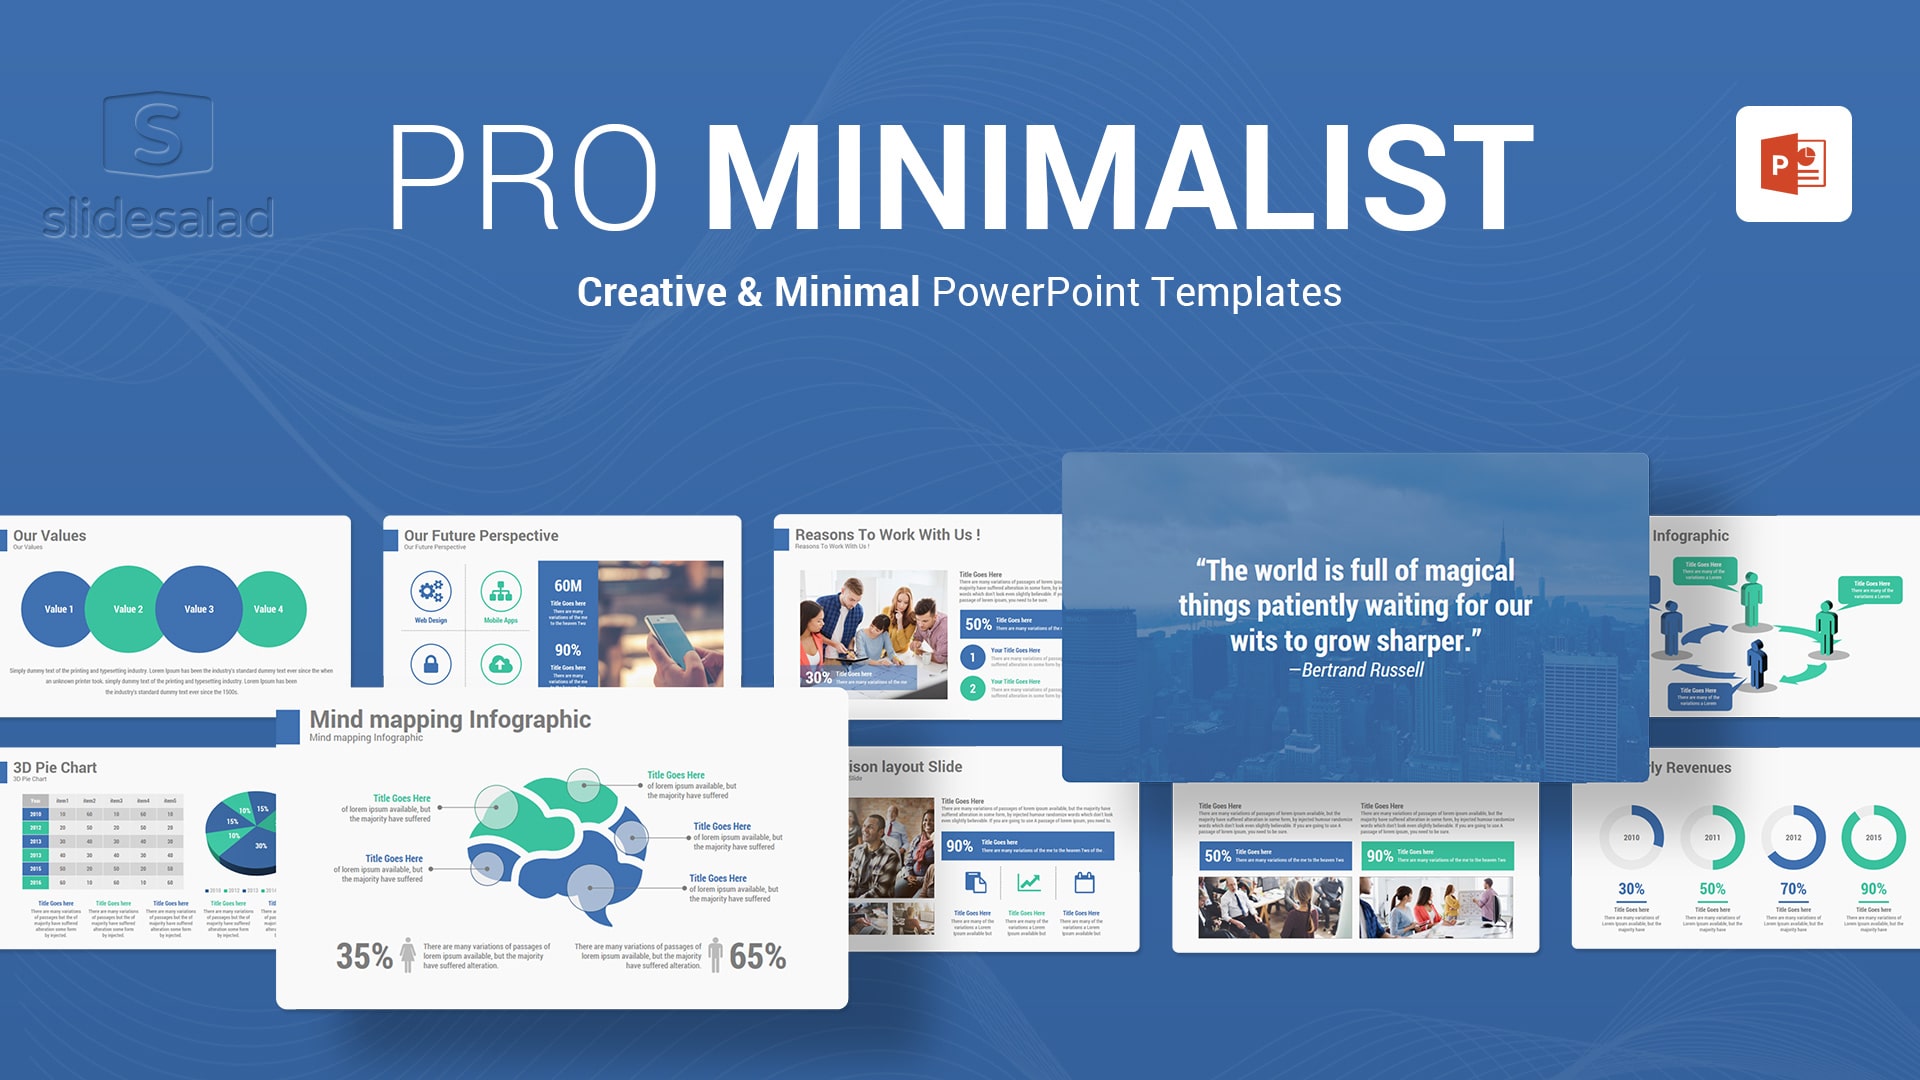 Pro Minimalist PowerPoint Template Designs - Sophisticated Minimalist Designs for a Professional Look